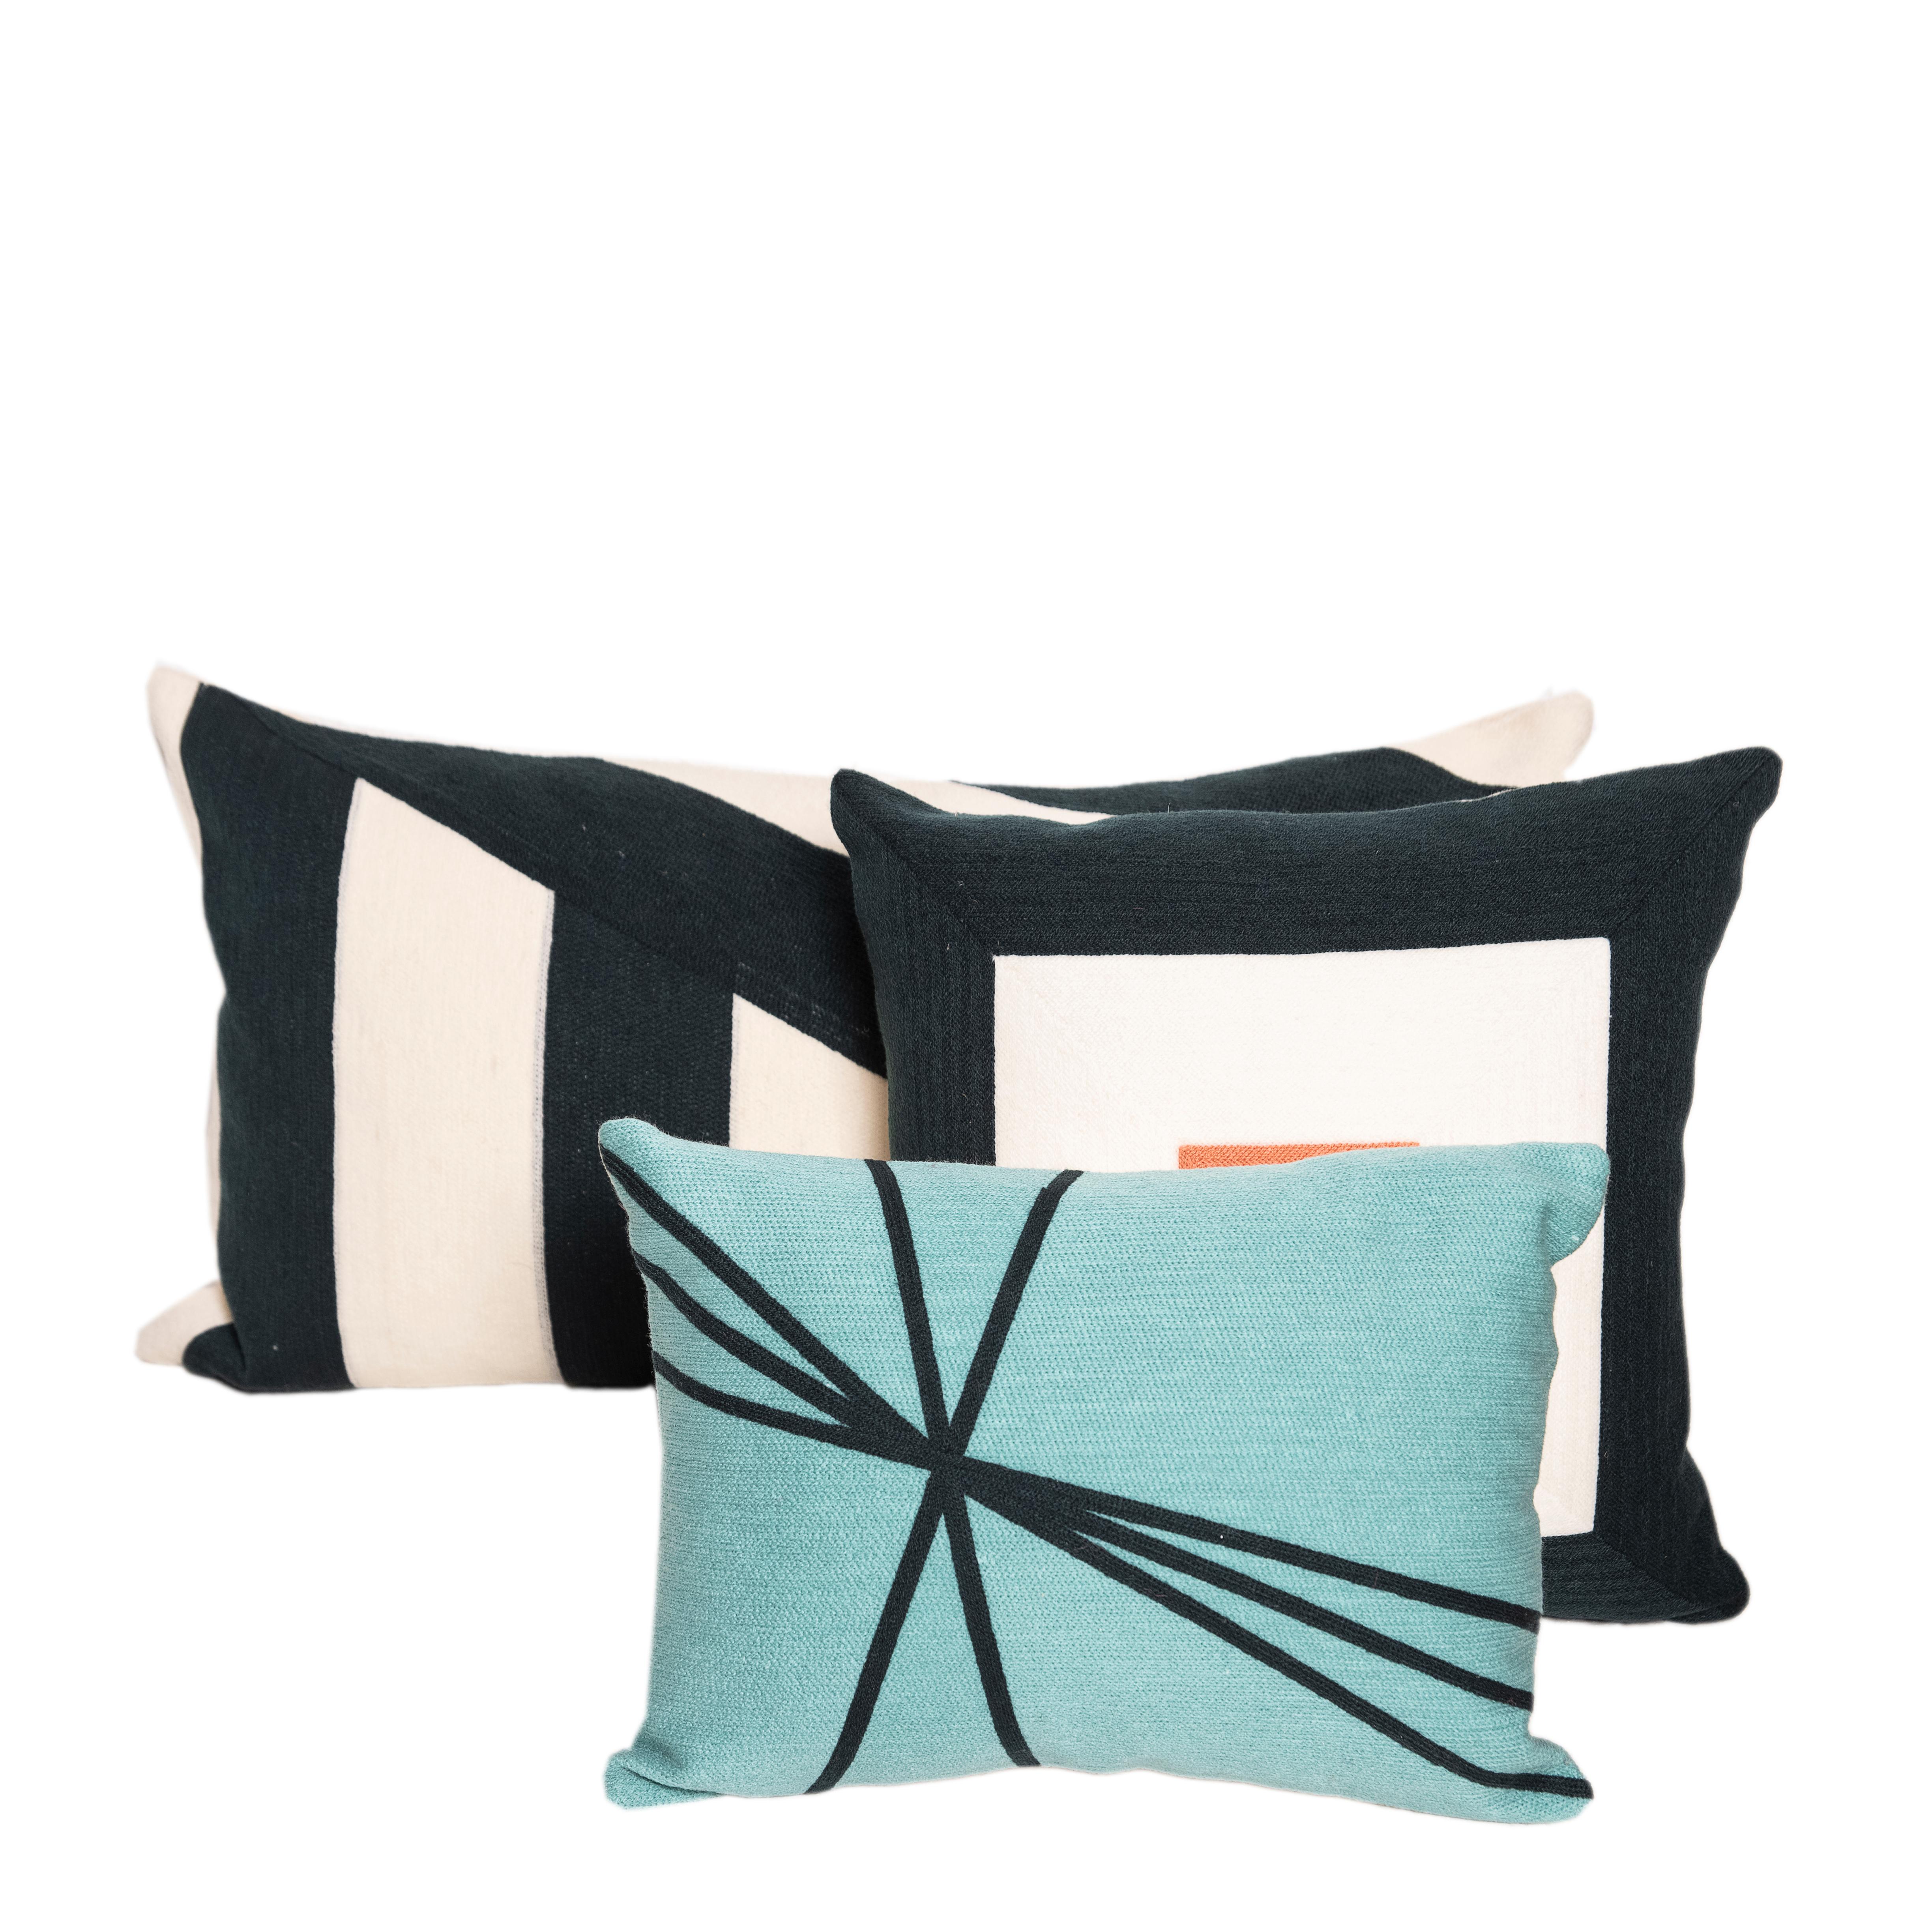 Embroidered Modern Kilombo Home Embroidery Pillow Cushion Cotton Turquoise Navy blue For Sale